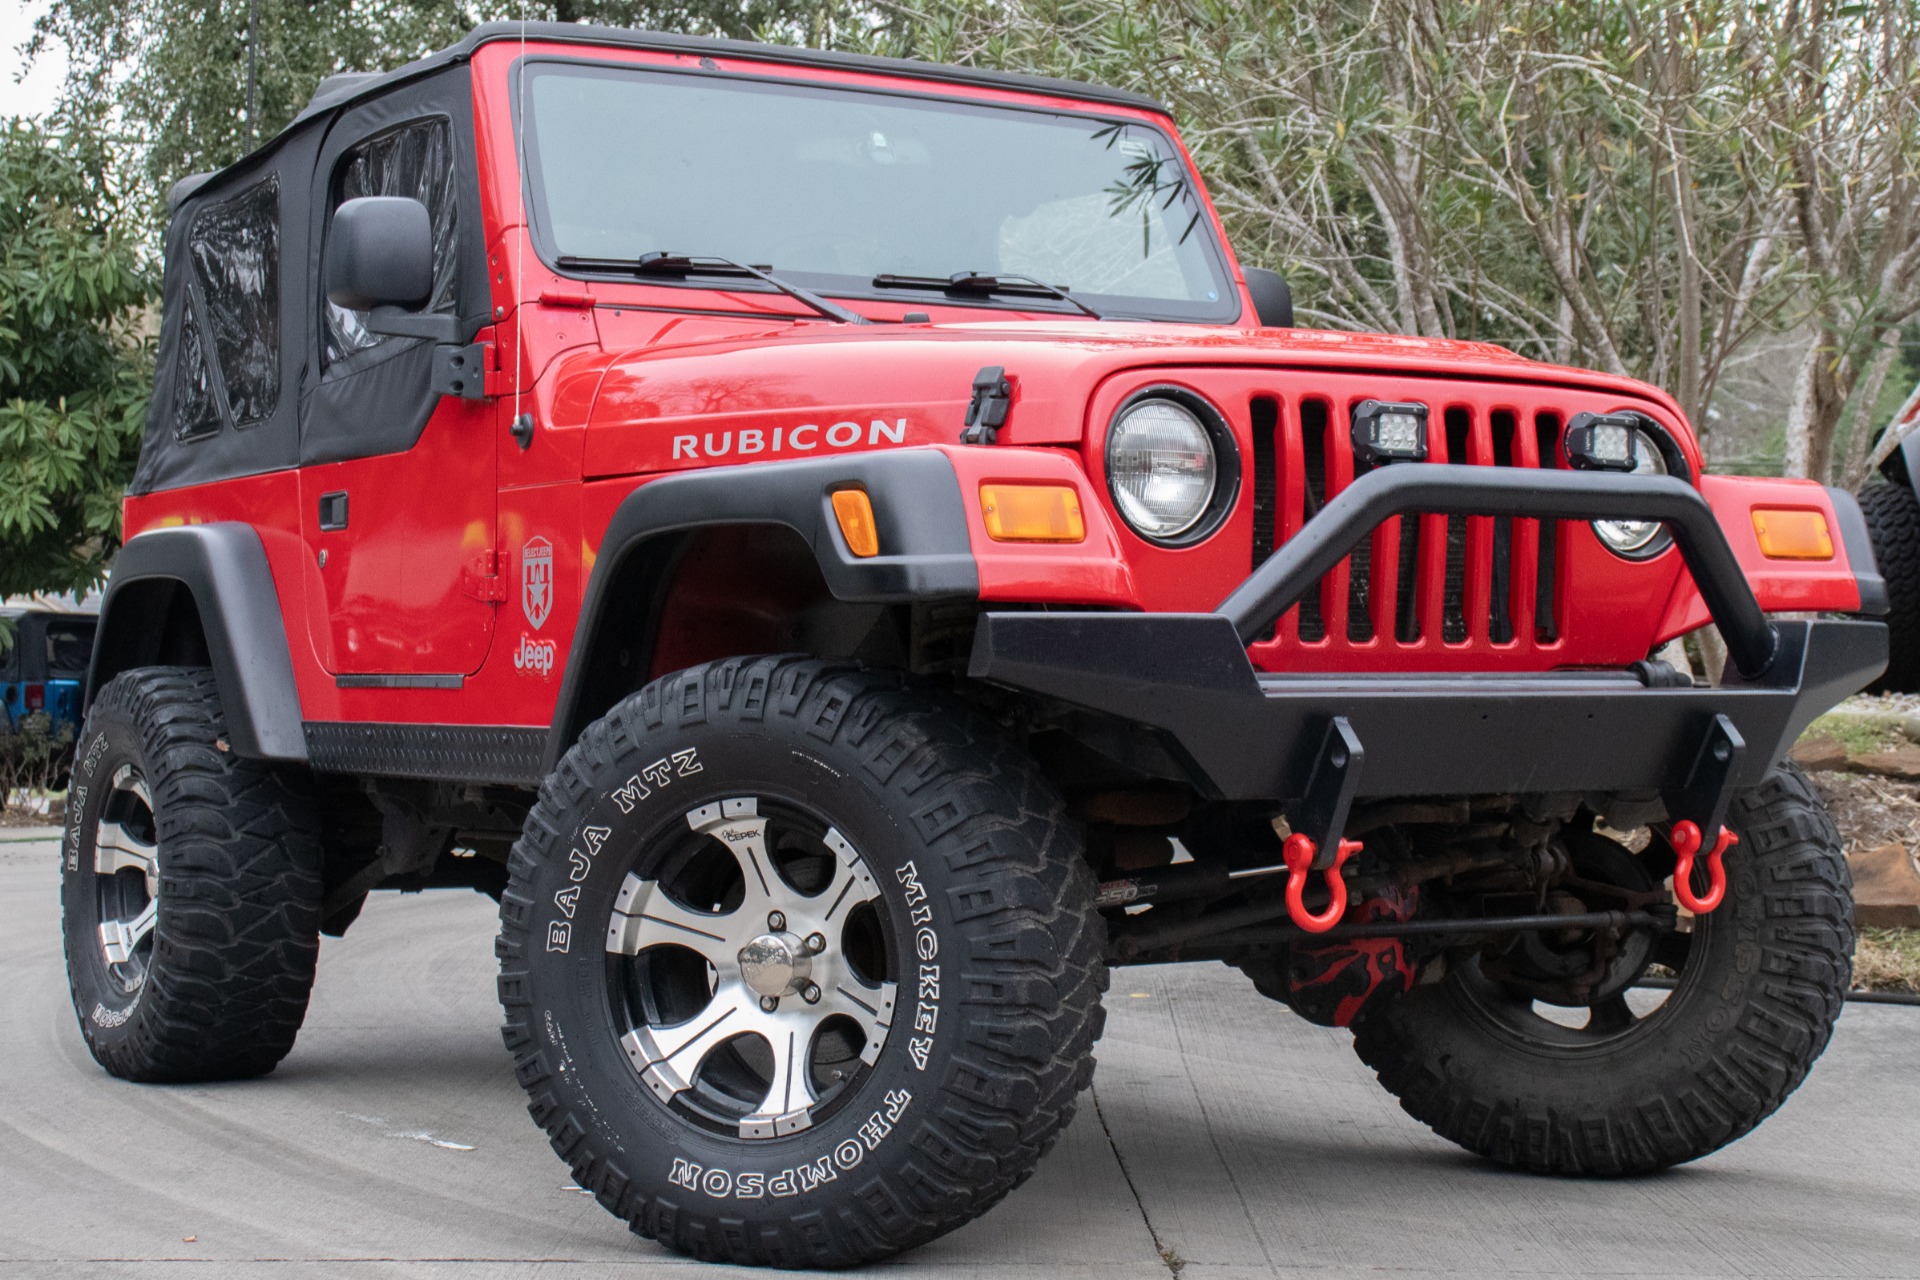 Used 2005 Jeep Wrangler Rubicon For Sale ($17,995) | Select Jeeps Inc.  Stock #304486